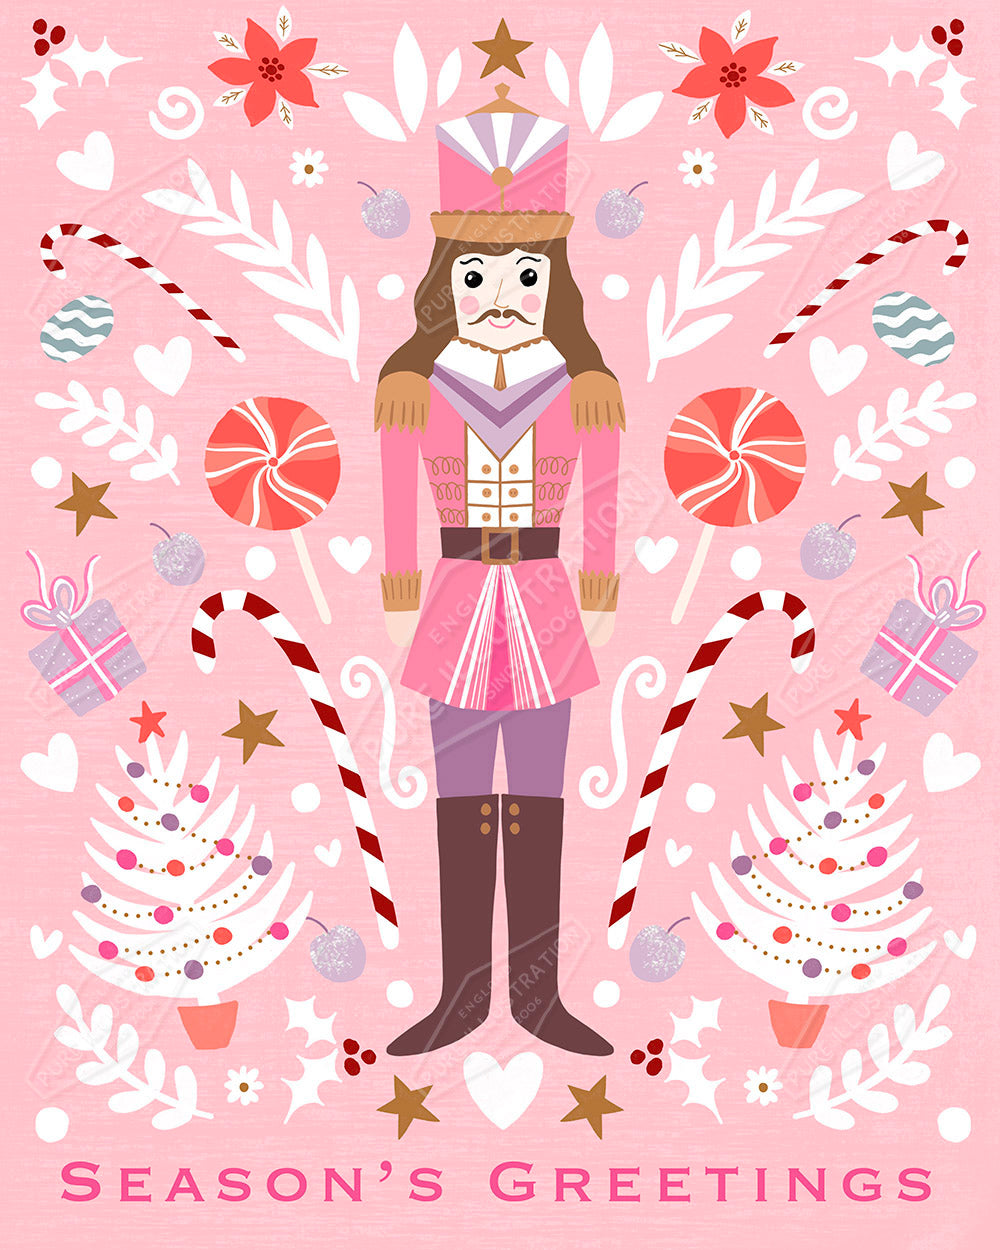 Nutcracker Christmas Illustration by Sian Summerhayes for Pure Art Licensing Agency